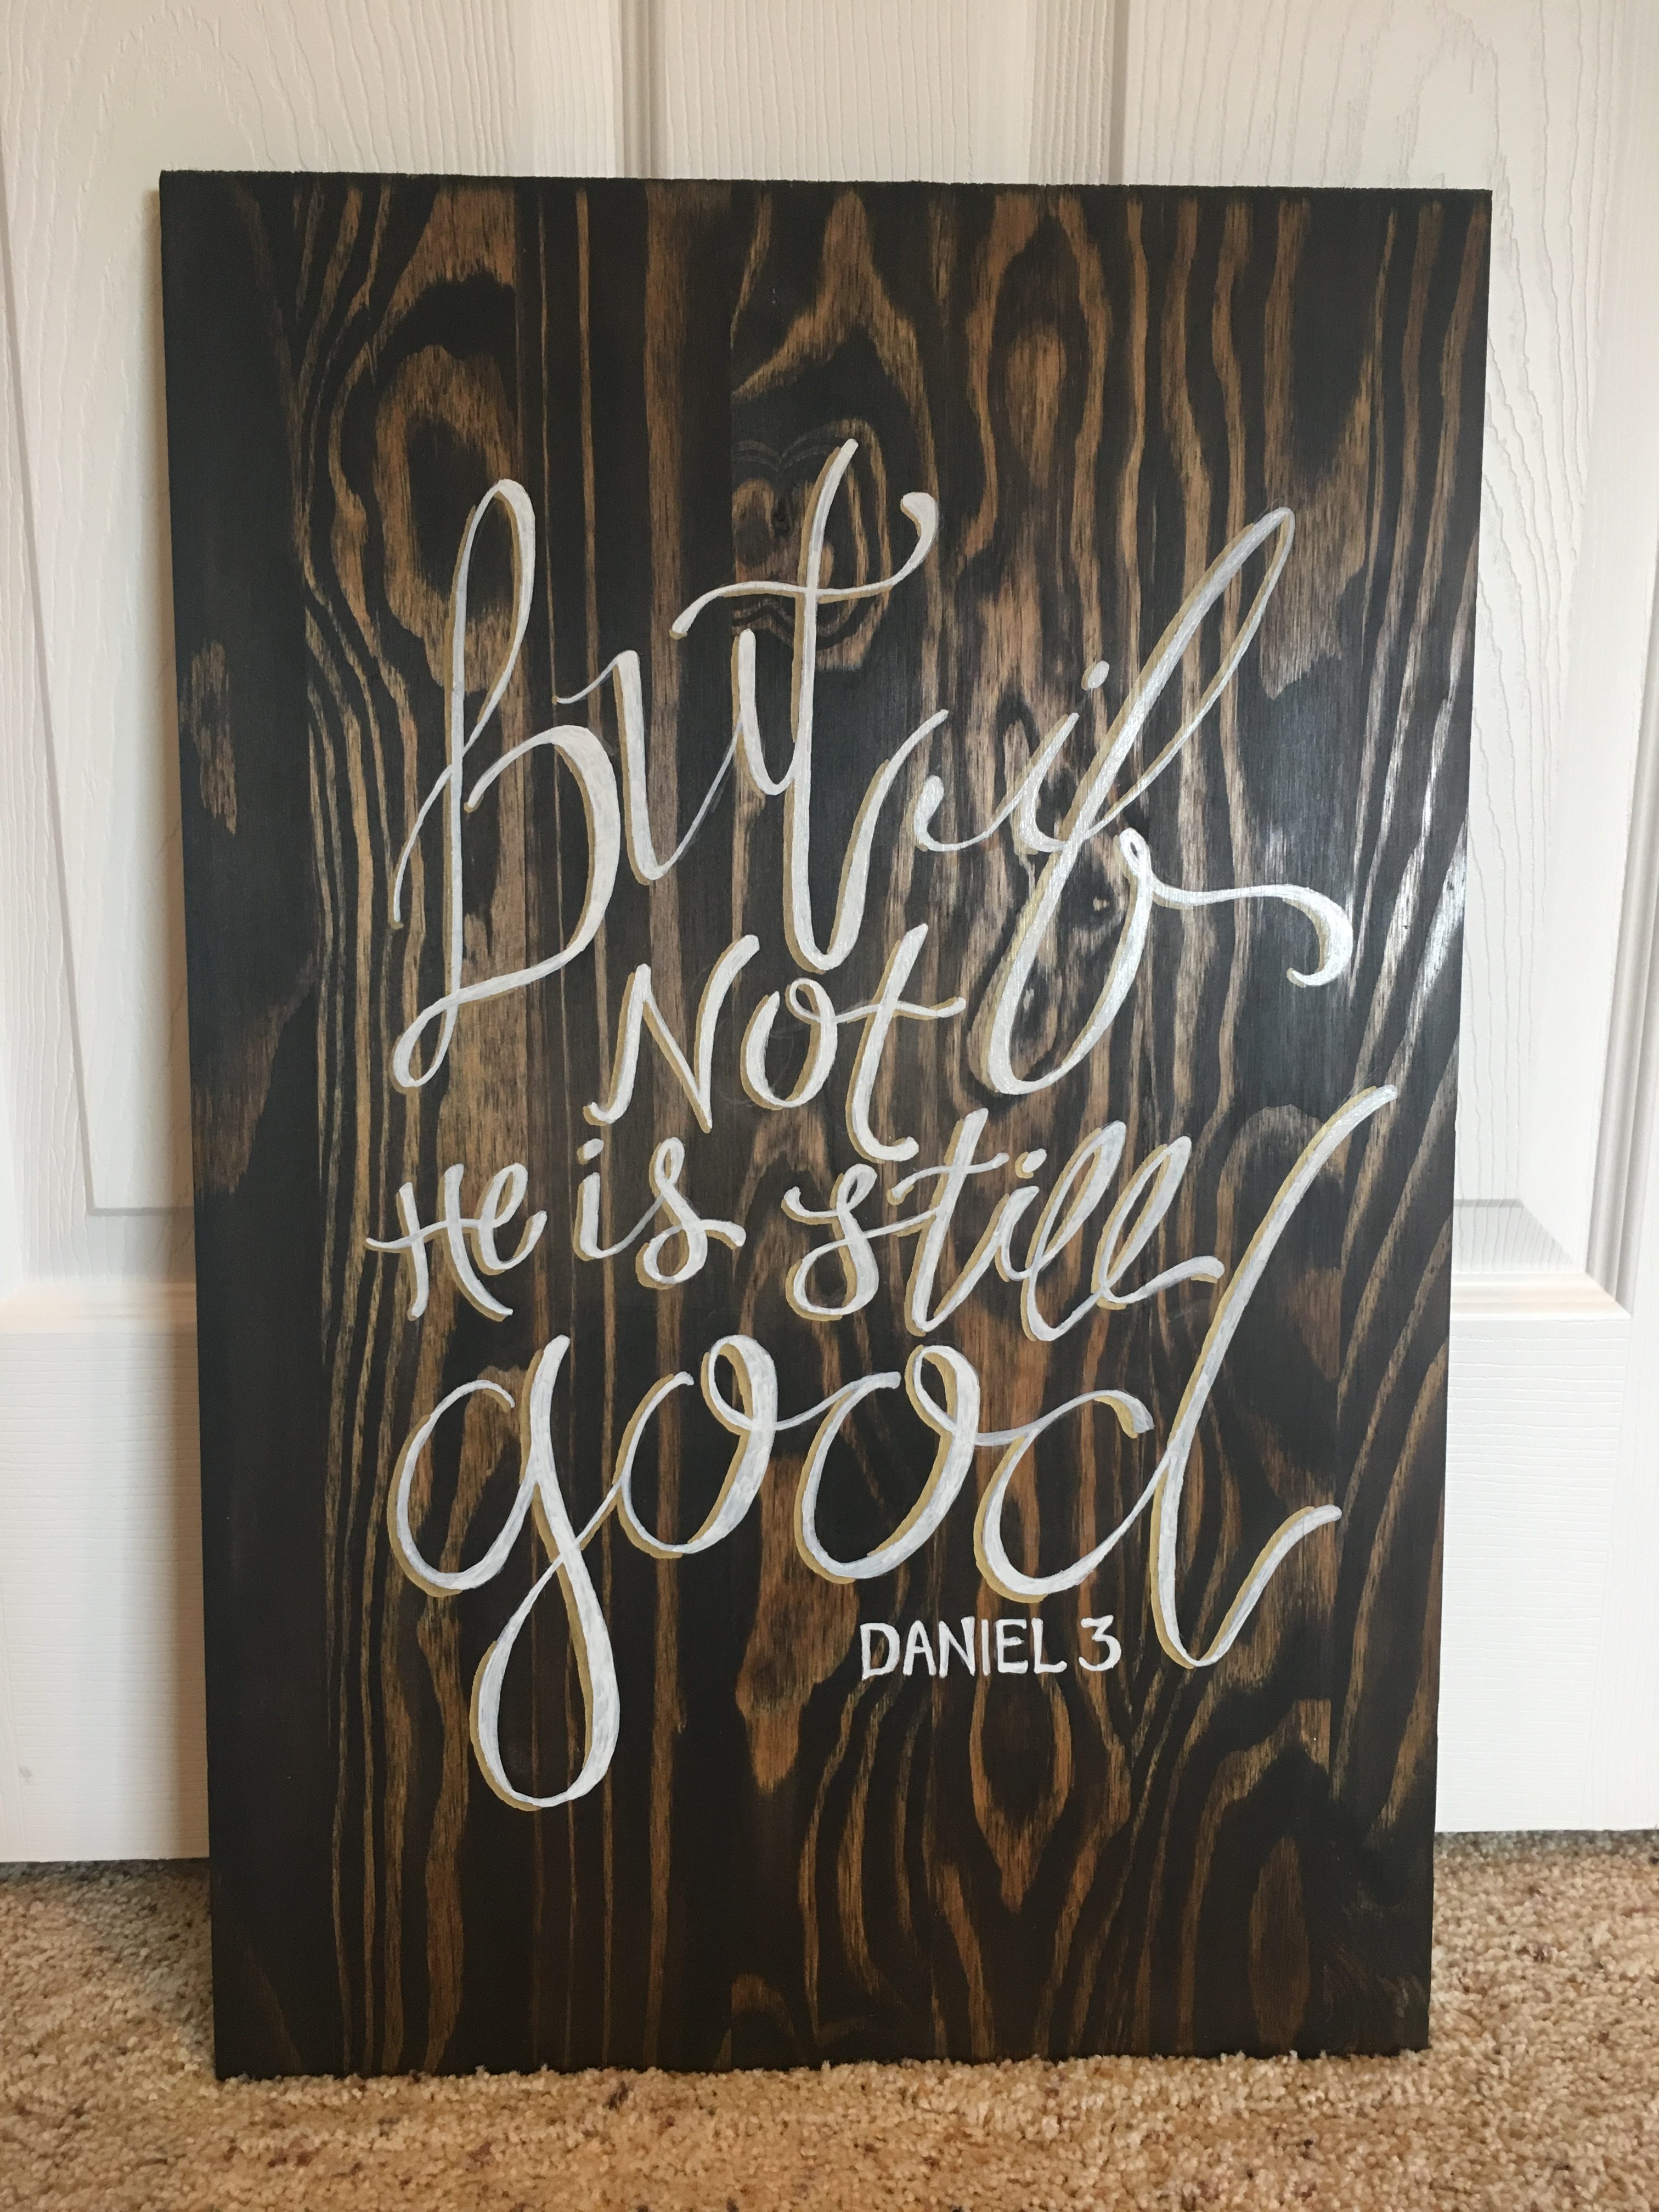 A wood board that says, "But if not He is still good. - Daniel 3"